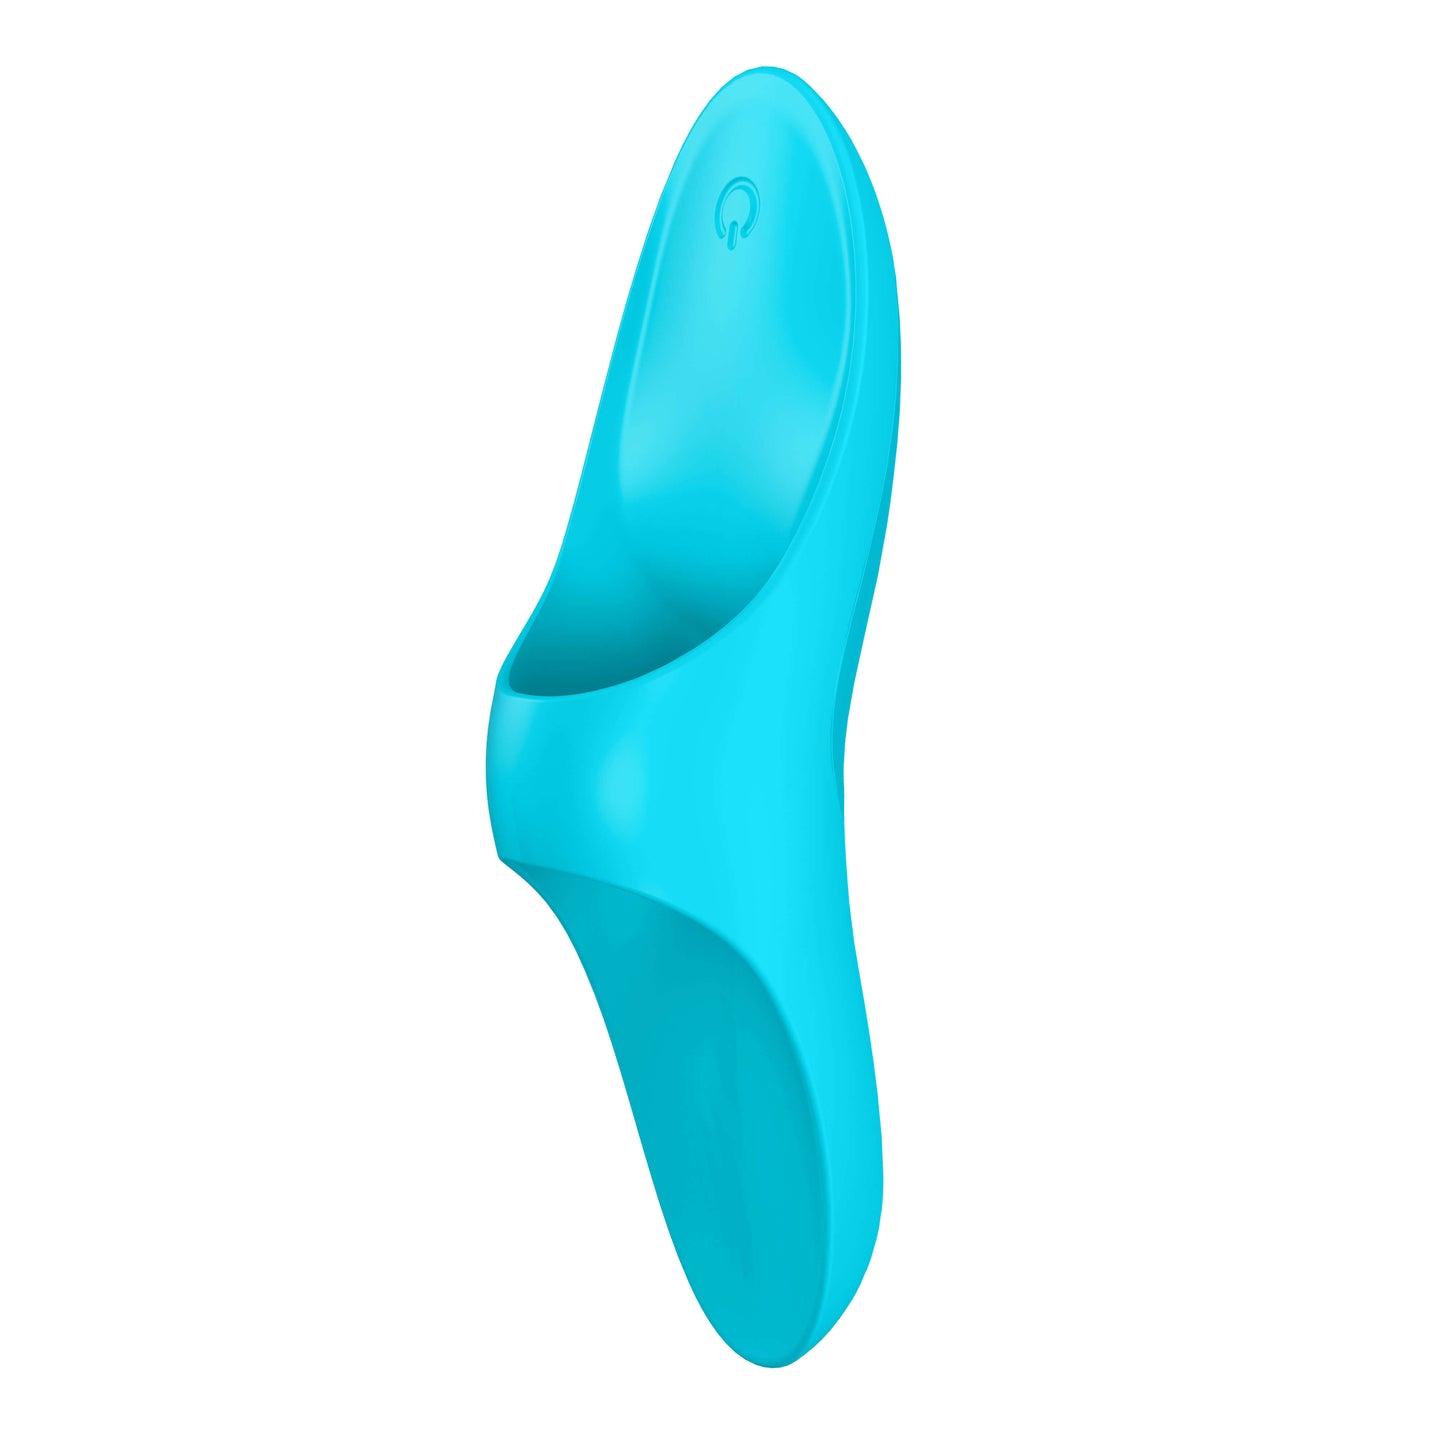 Satisfyer Teaser in light blue - by The Bigger O an online sex toy shop. We ship to USA, Canada and the UK.